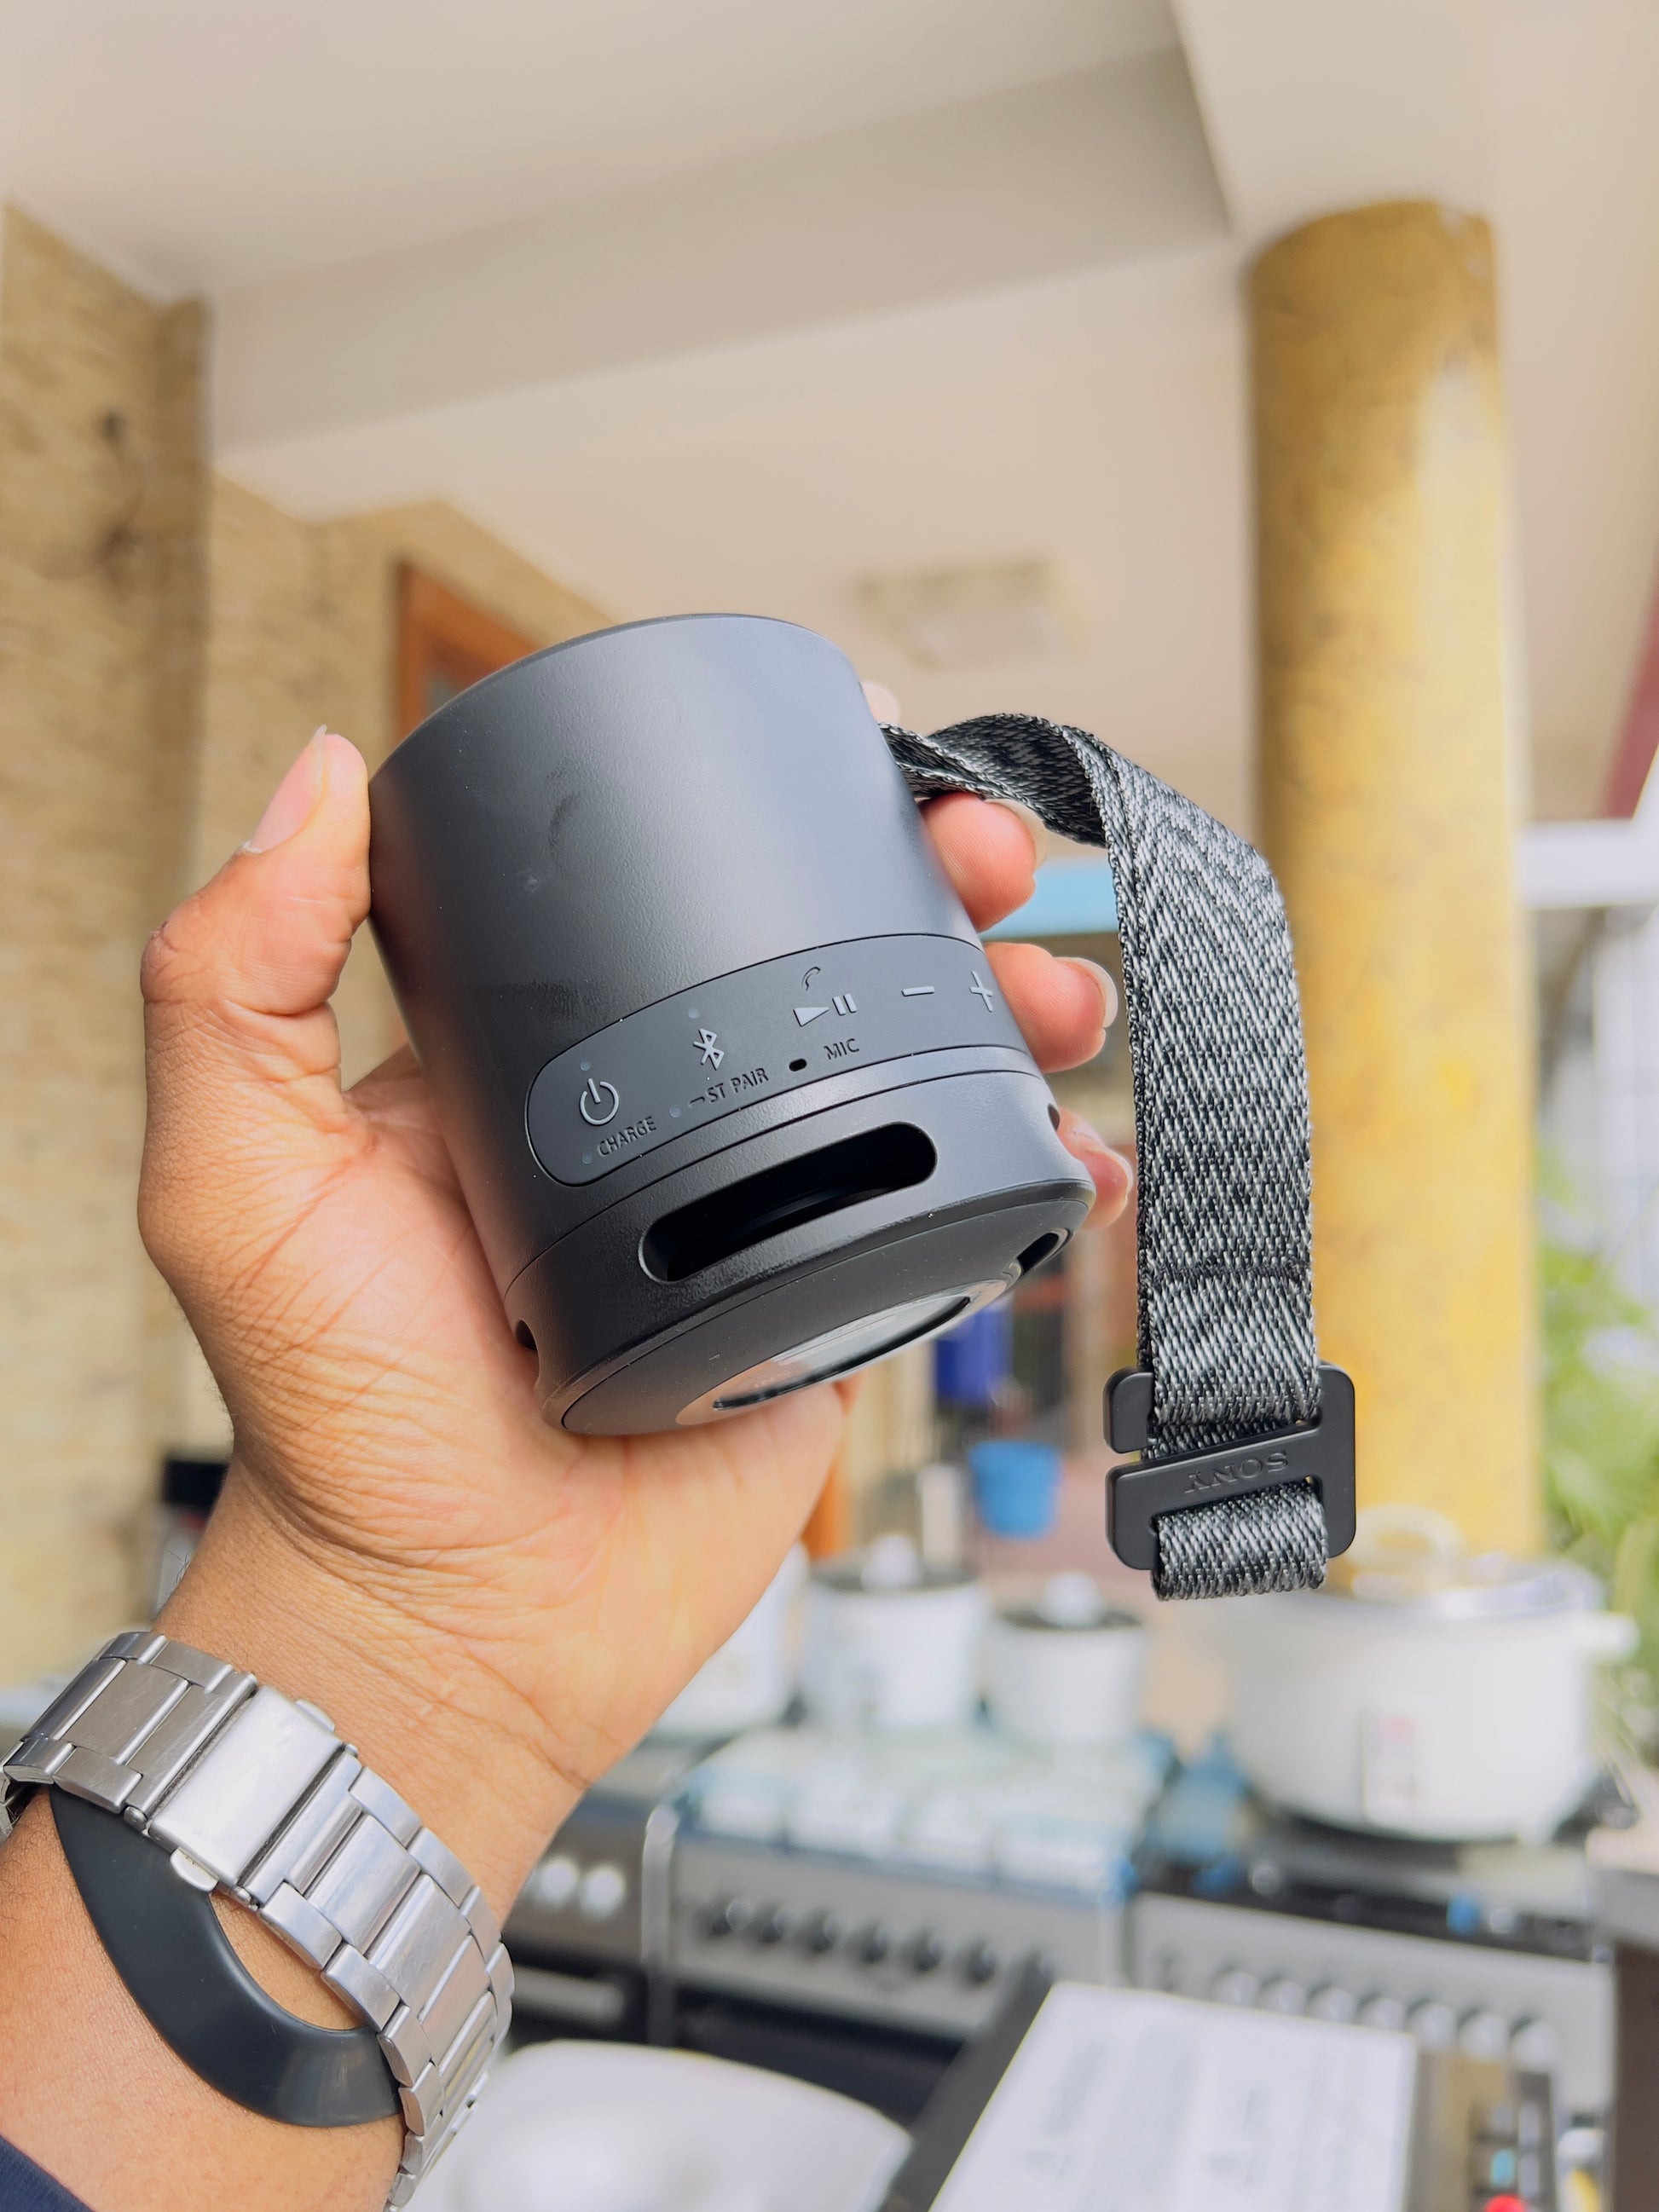 Review: Sony's SRS-XB13 Bluetooth Speaker Is Outdoor-Ready